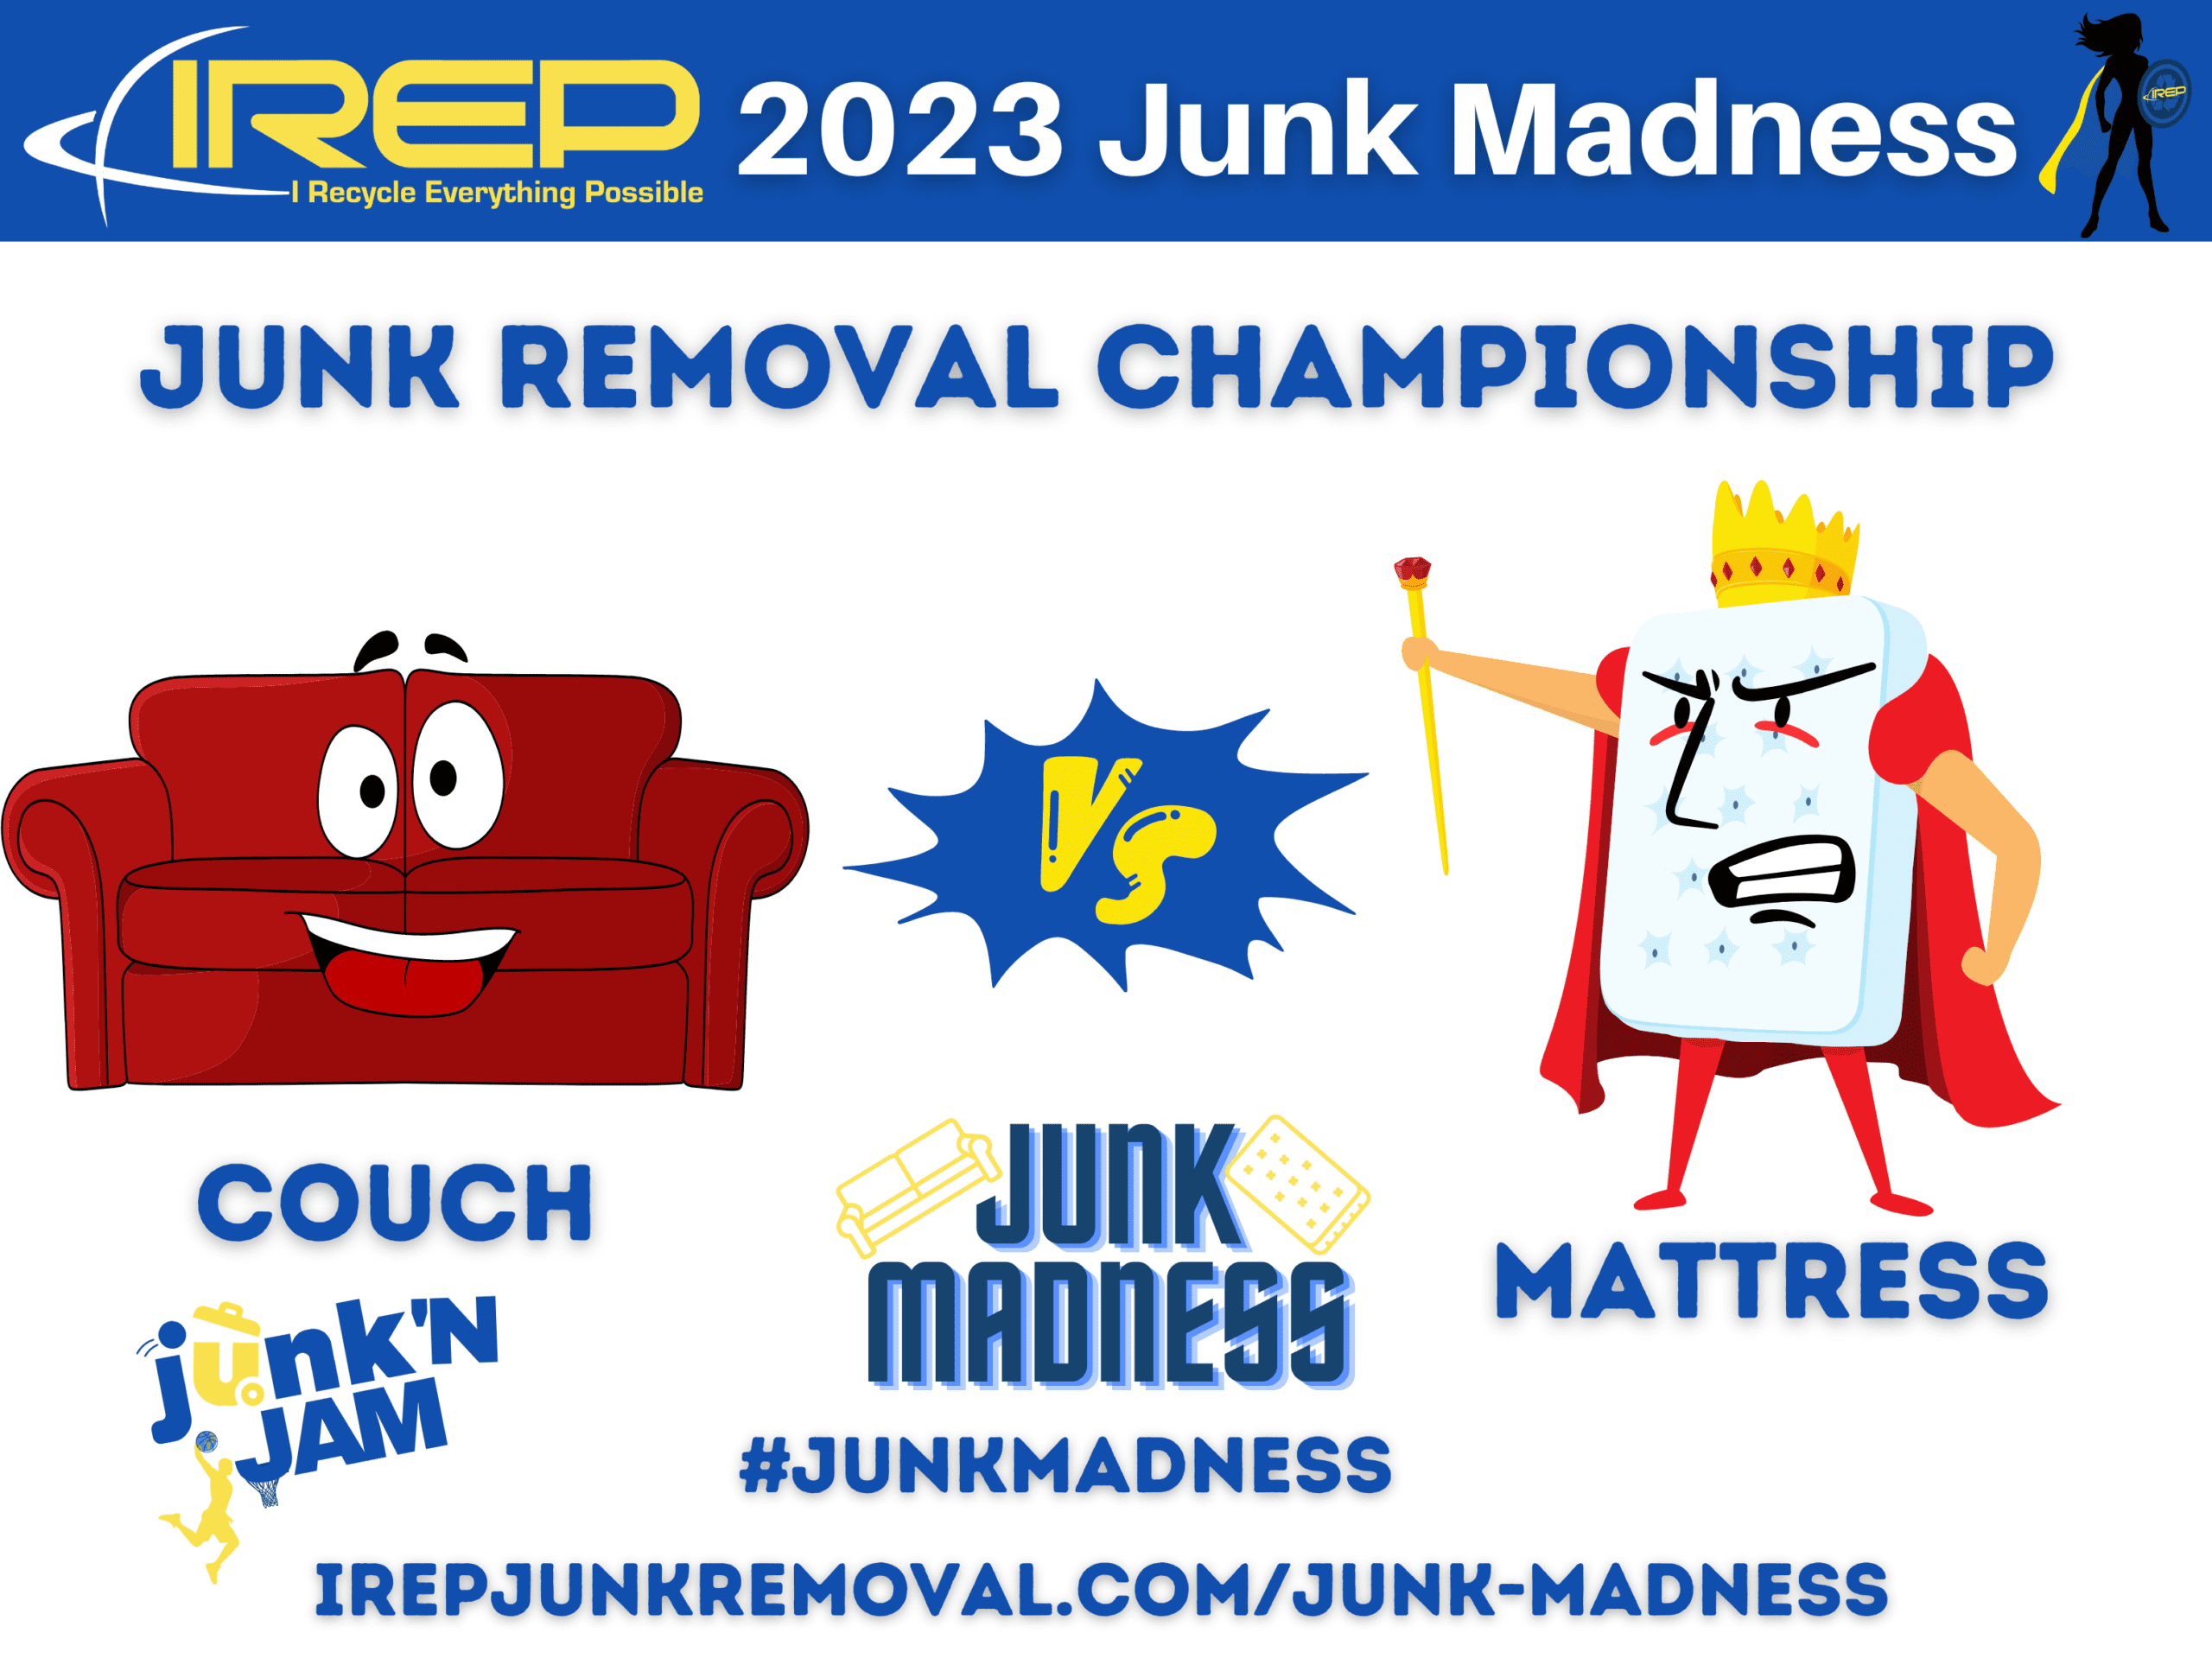 irep junk removal junk madness junk 'n jam 2023 bracket march madness basketball sports fun free event